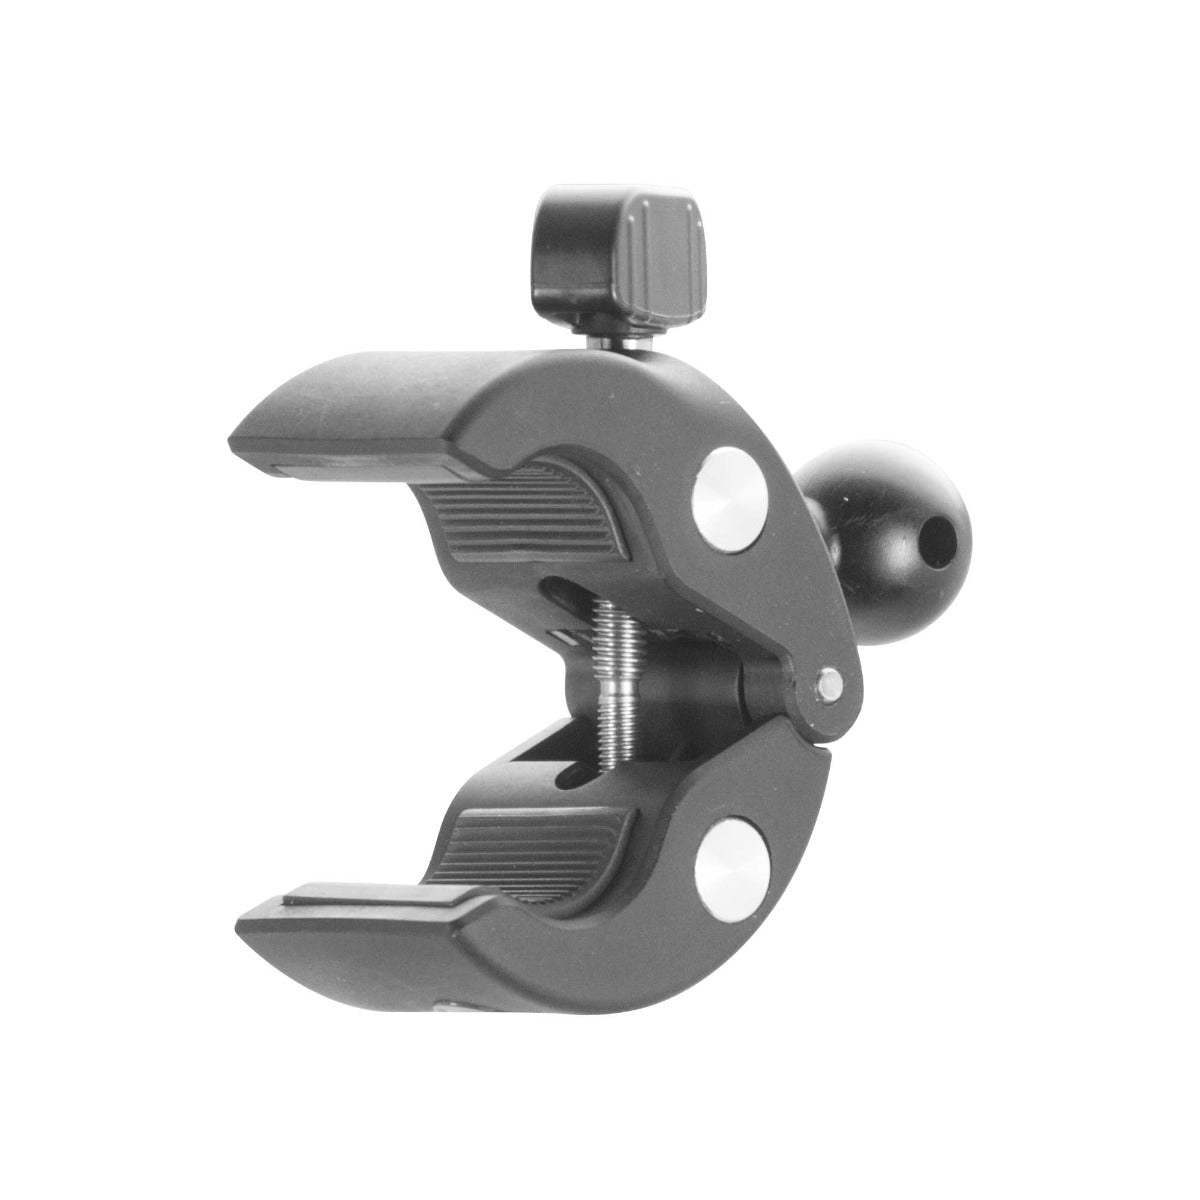 iBOLT™ 22mm Clamp Mount for Handlebars, poles, posts